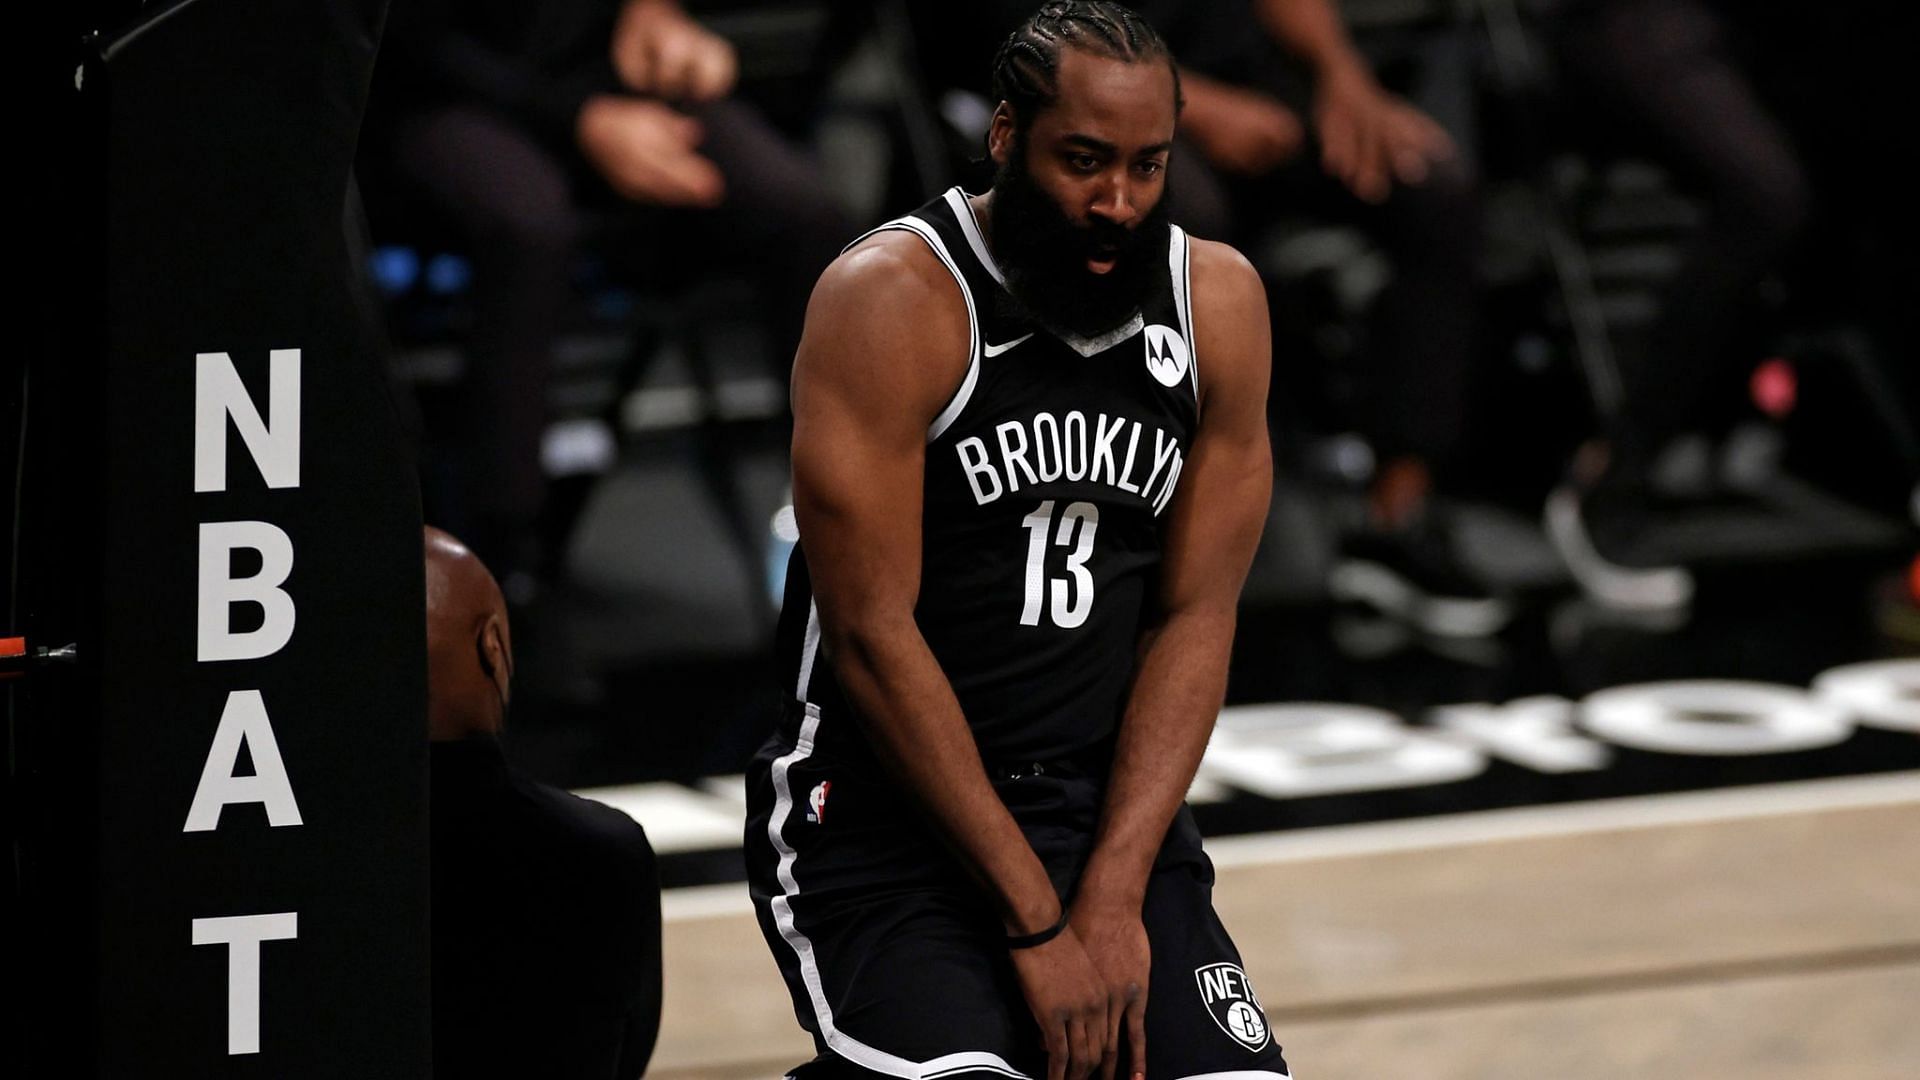 With Kevin Durant still sidelined with an injury, James Harden&#039;s hamstring and hand issues add another level of trouble to the Brooklyn Nets&#039; season [Photo: Sky Sports]